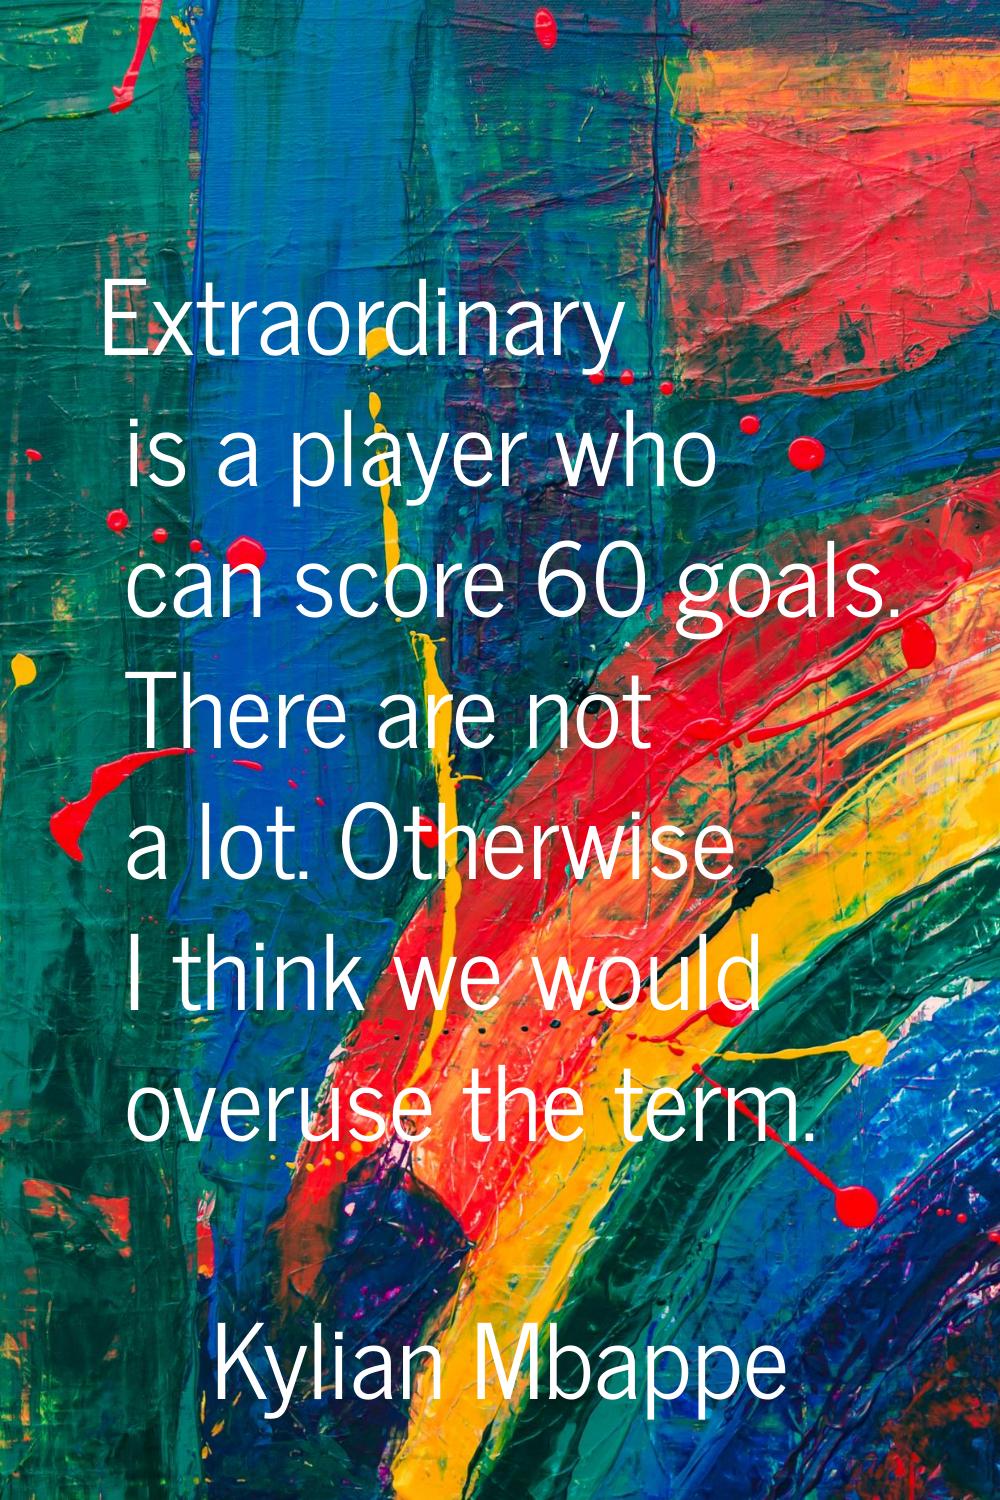 Extraordinary is a player who can score 60 goals. There are not a lot. Otherwise I think we would o